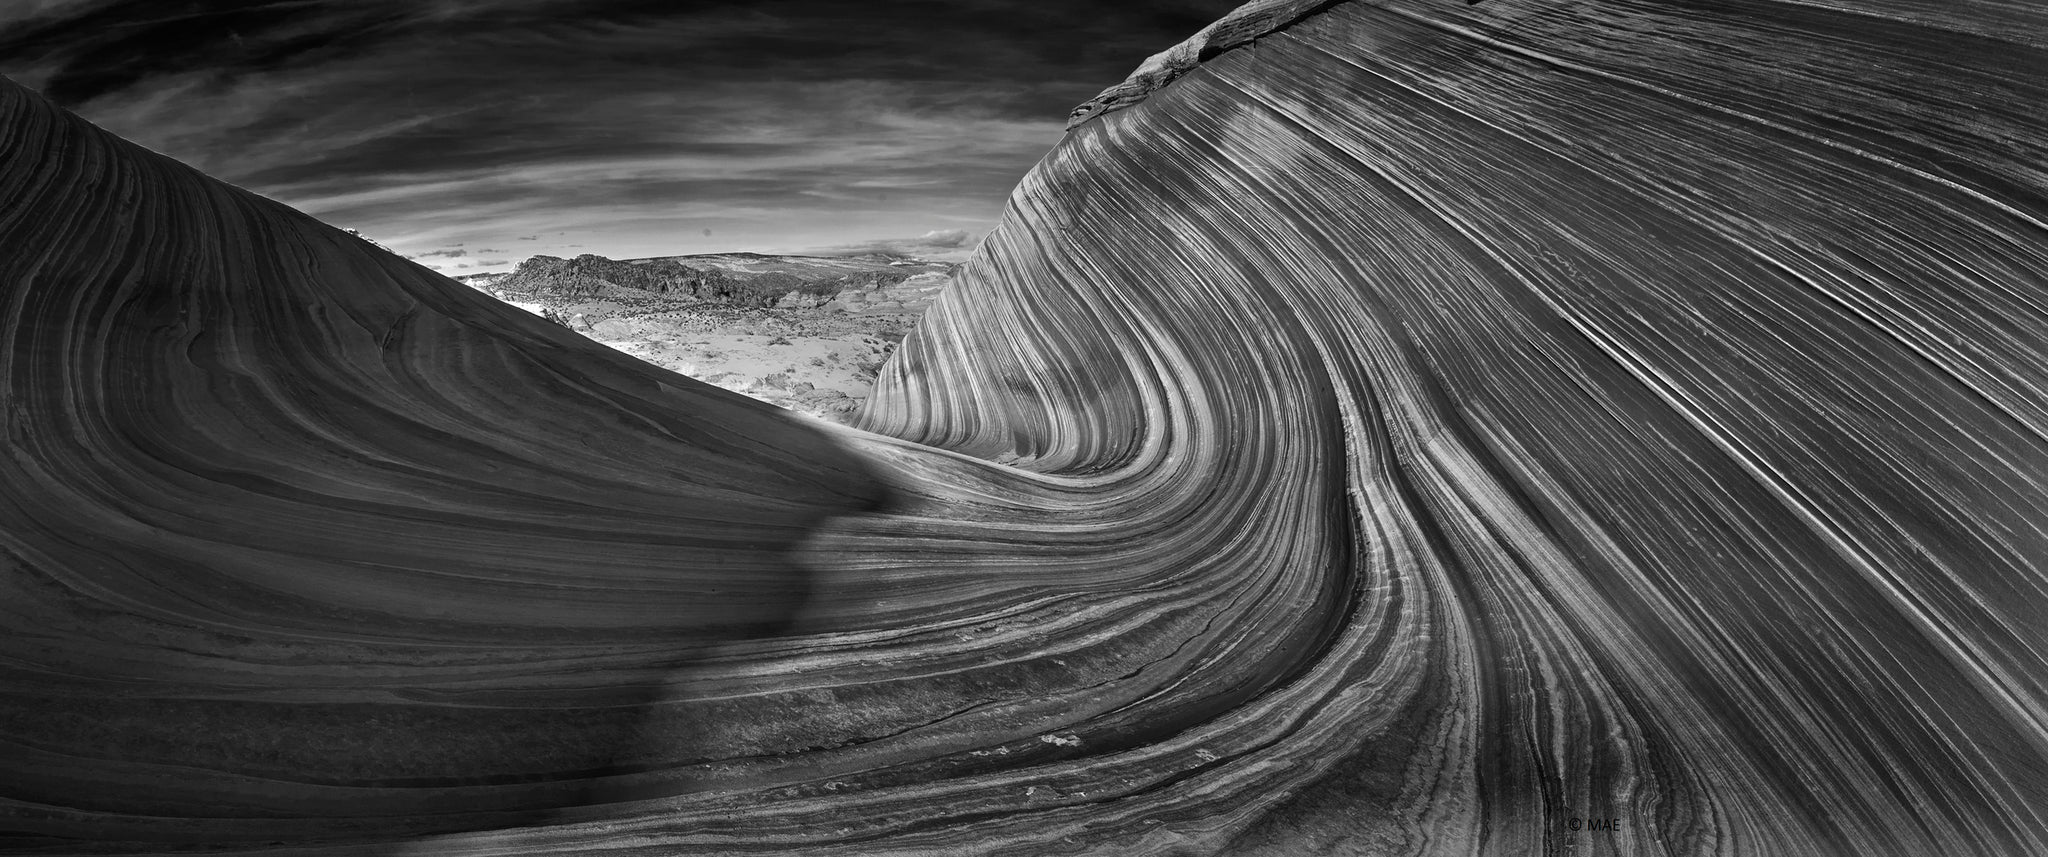 Black and White Photography of American landscape series - "The Wave, Paria Canyon, Arizona" n.1